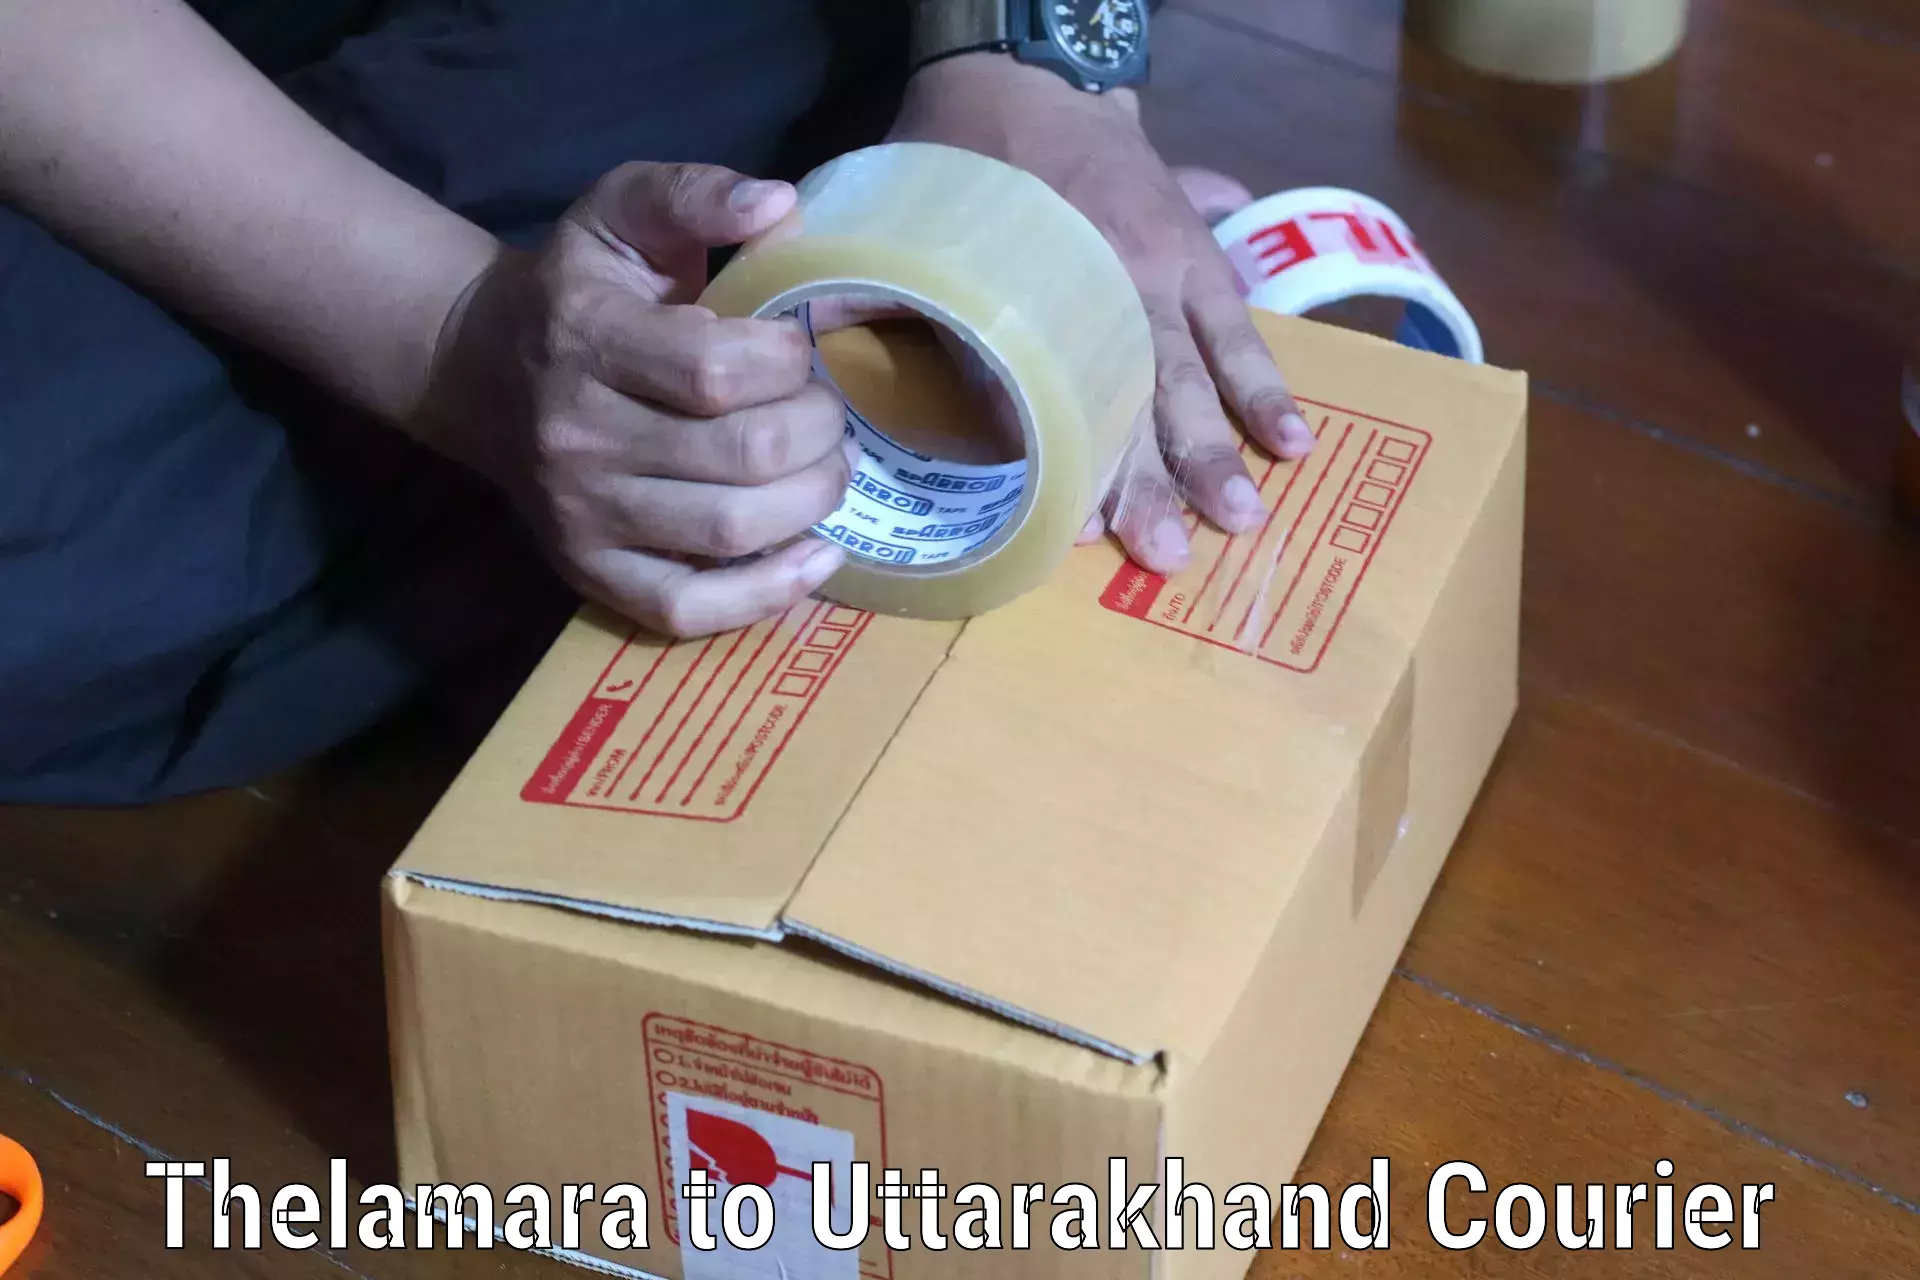 Multi-national courier services Thelamara to Almora